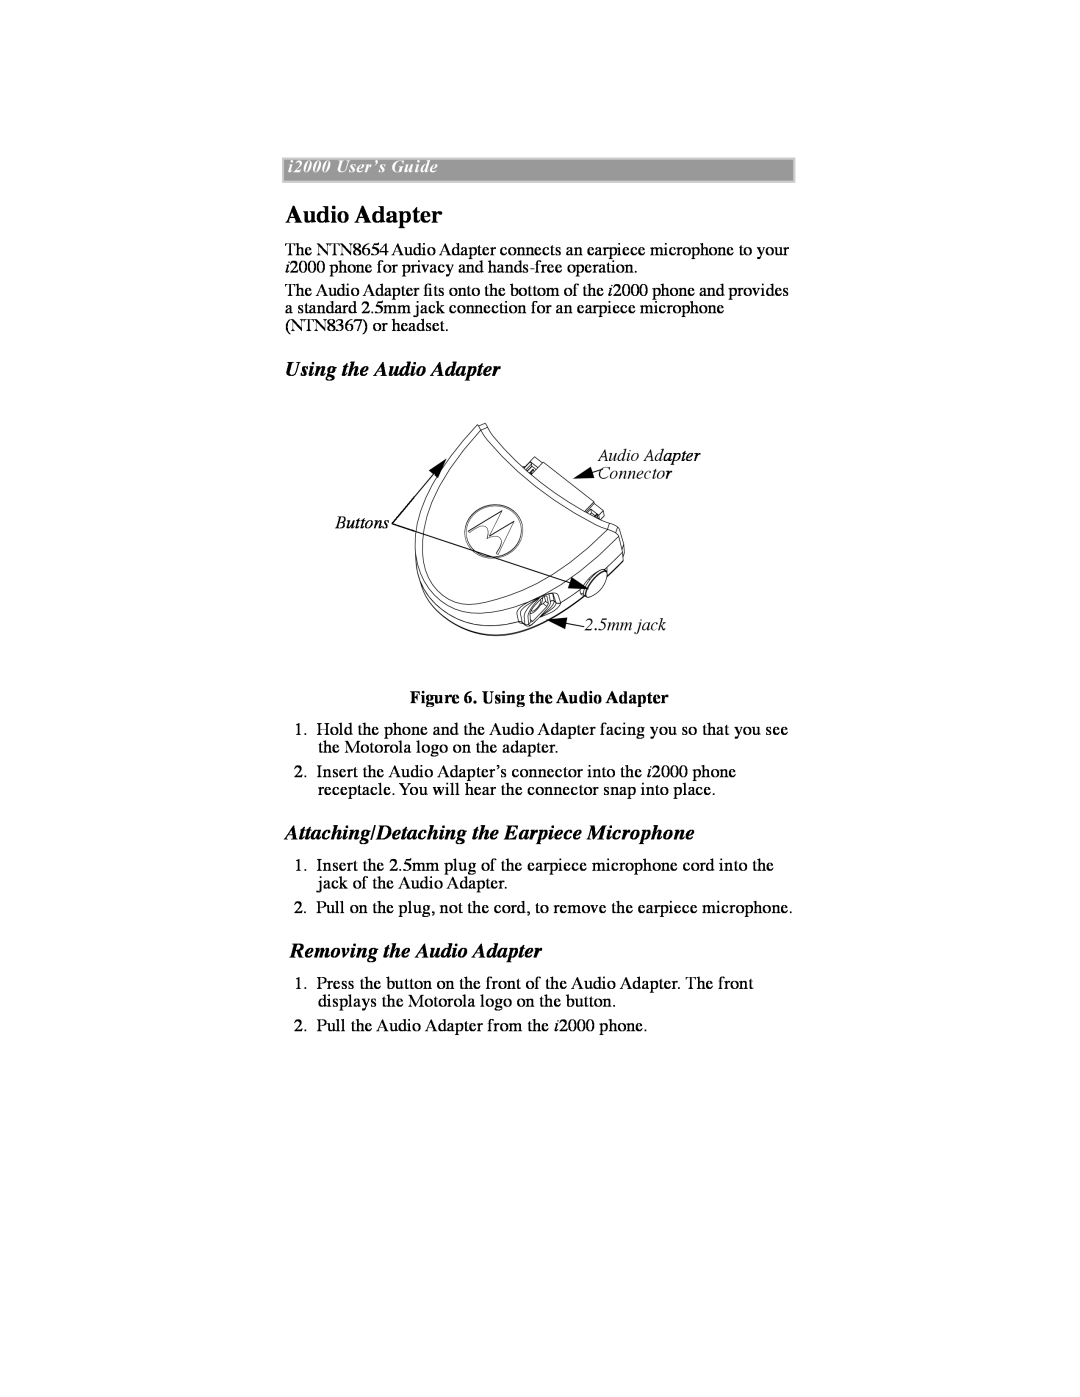 Motorola iDEN manual Using the Audio Adapter, Attaching/Detaching the Earpiece Microphone, Removing the Audio Adapter 